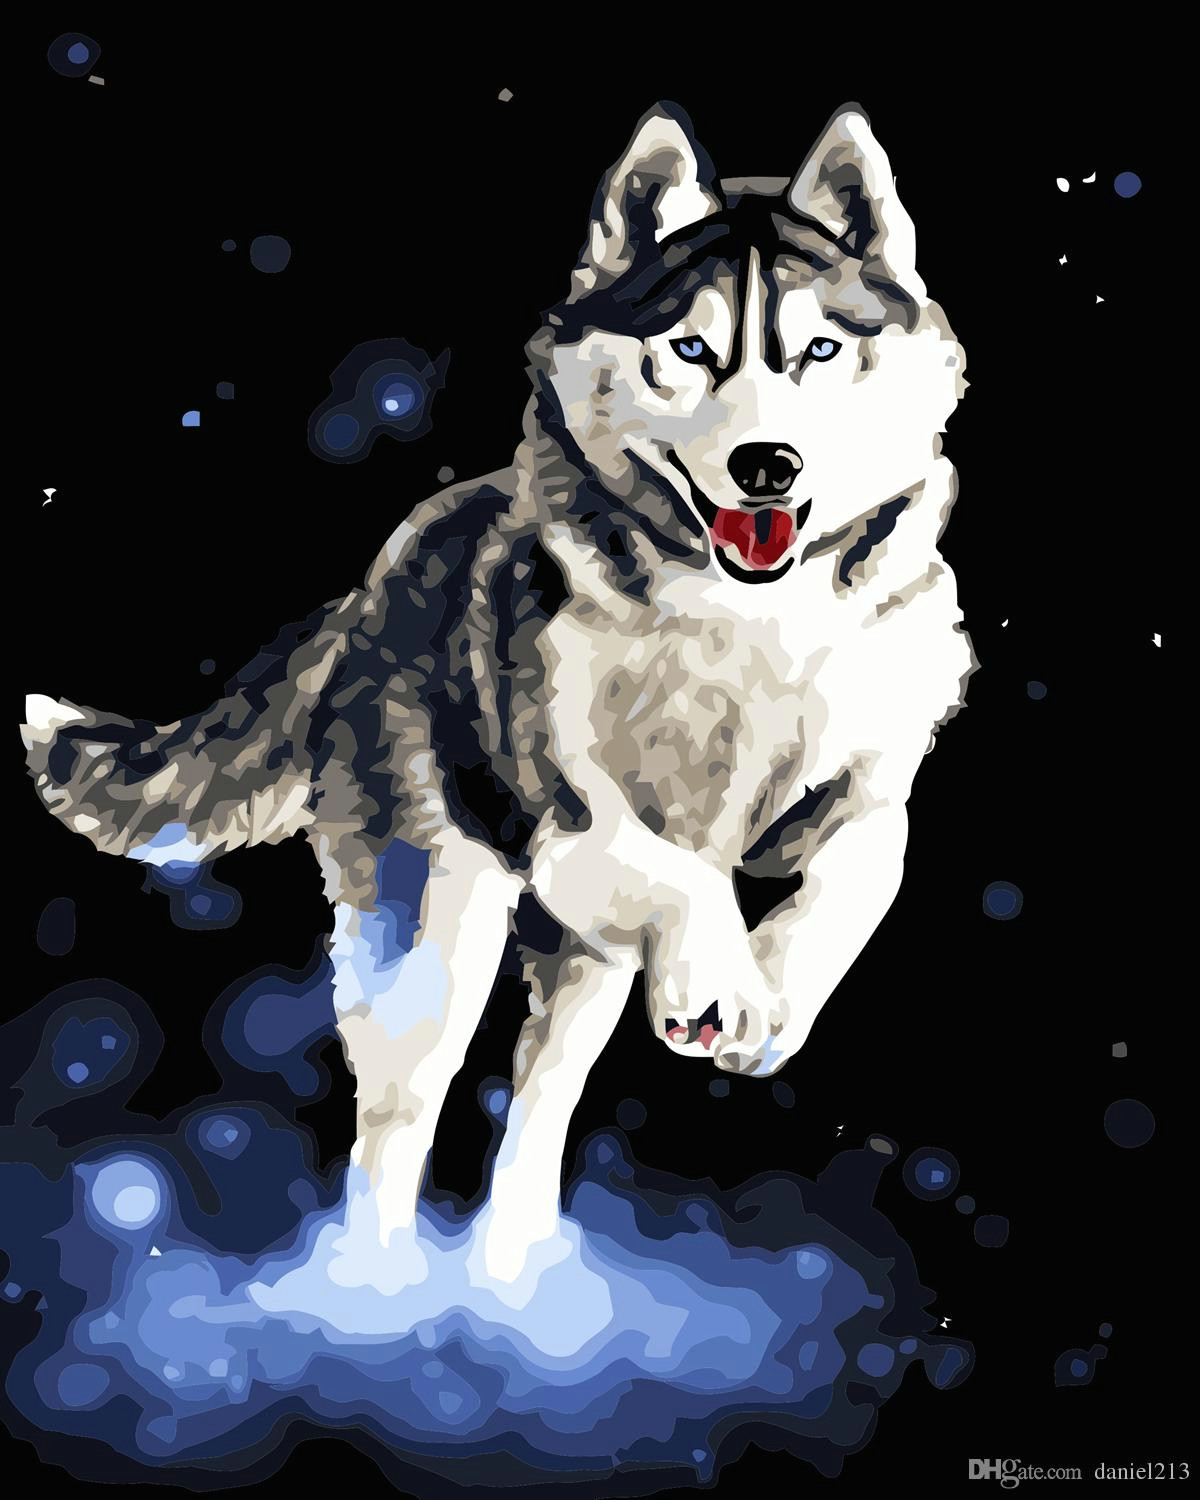 coming pet husky dog 16x20 inches diy paint on canvas drawing by numbers kits art acrylic oil painting frame for adult teen